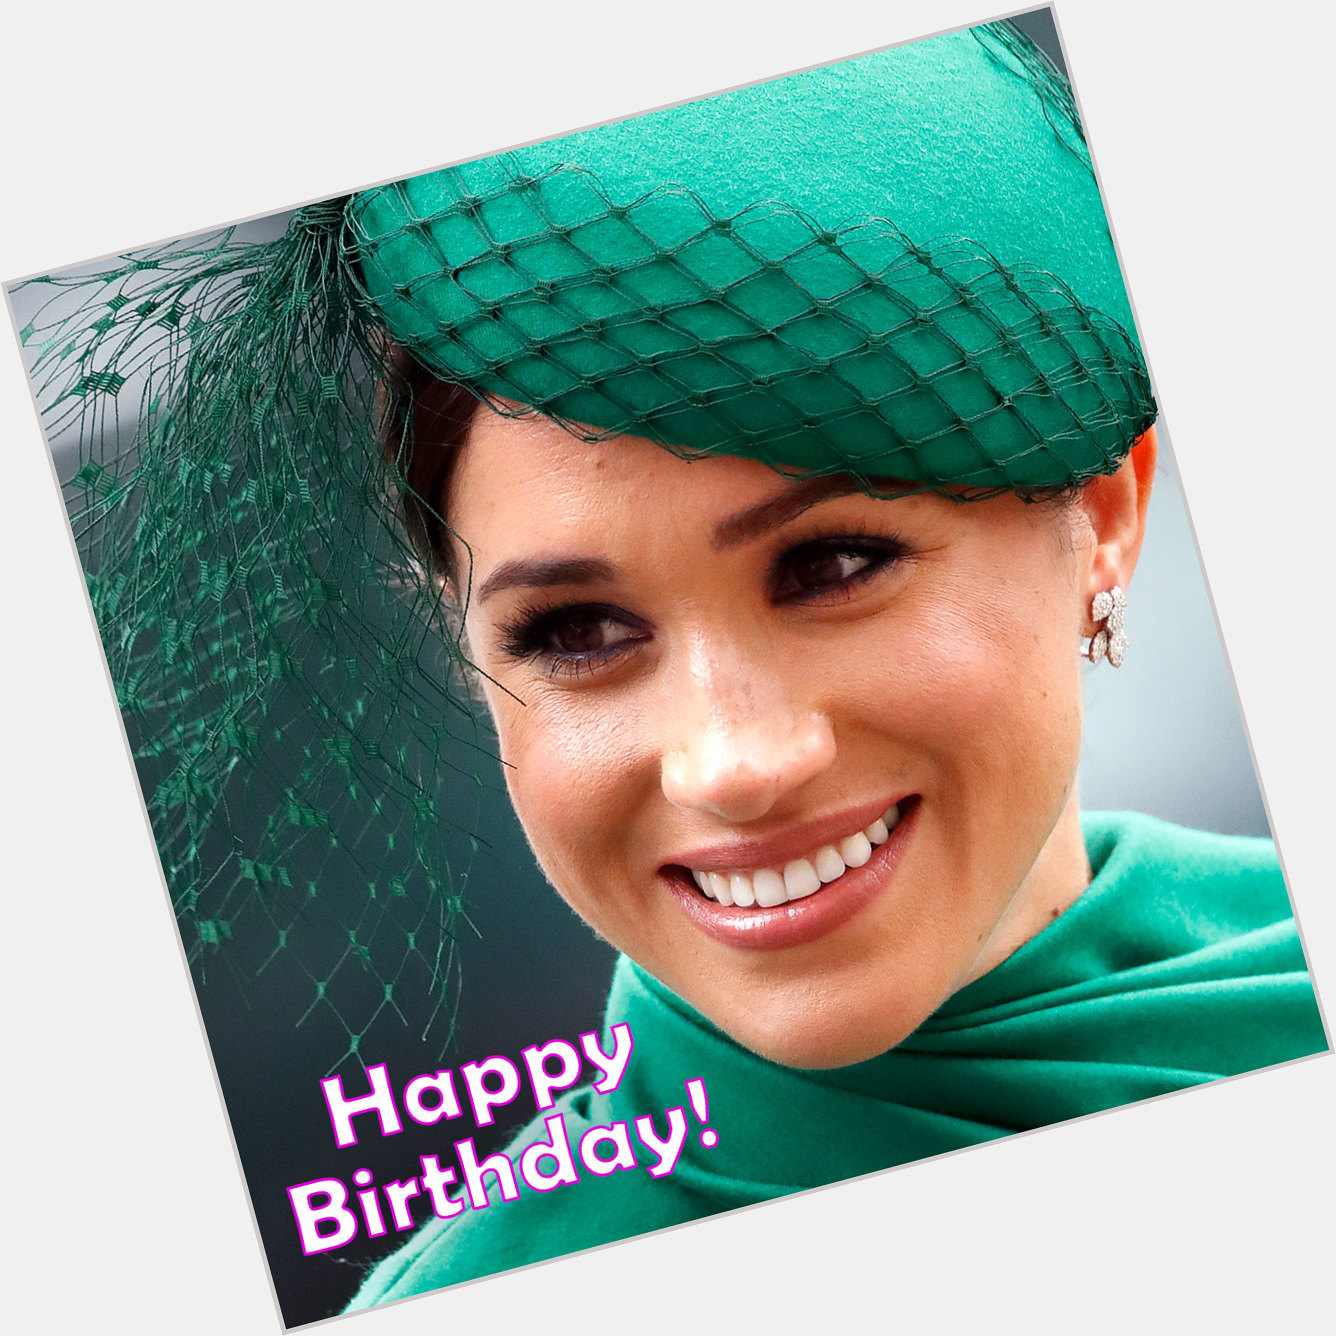 Happy birthday to Meghan Markle. The Duchess of Sussex is 39 today! 